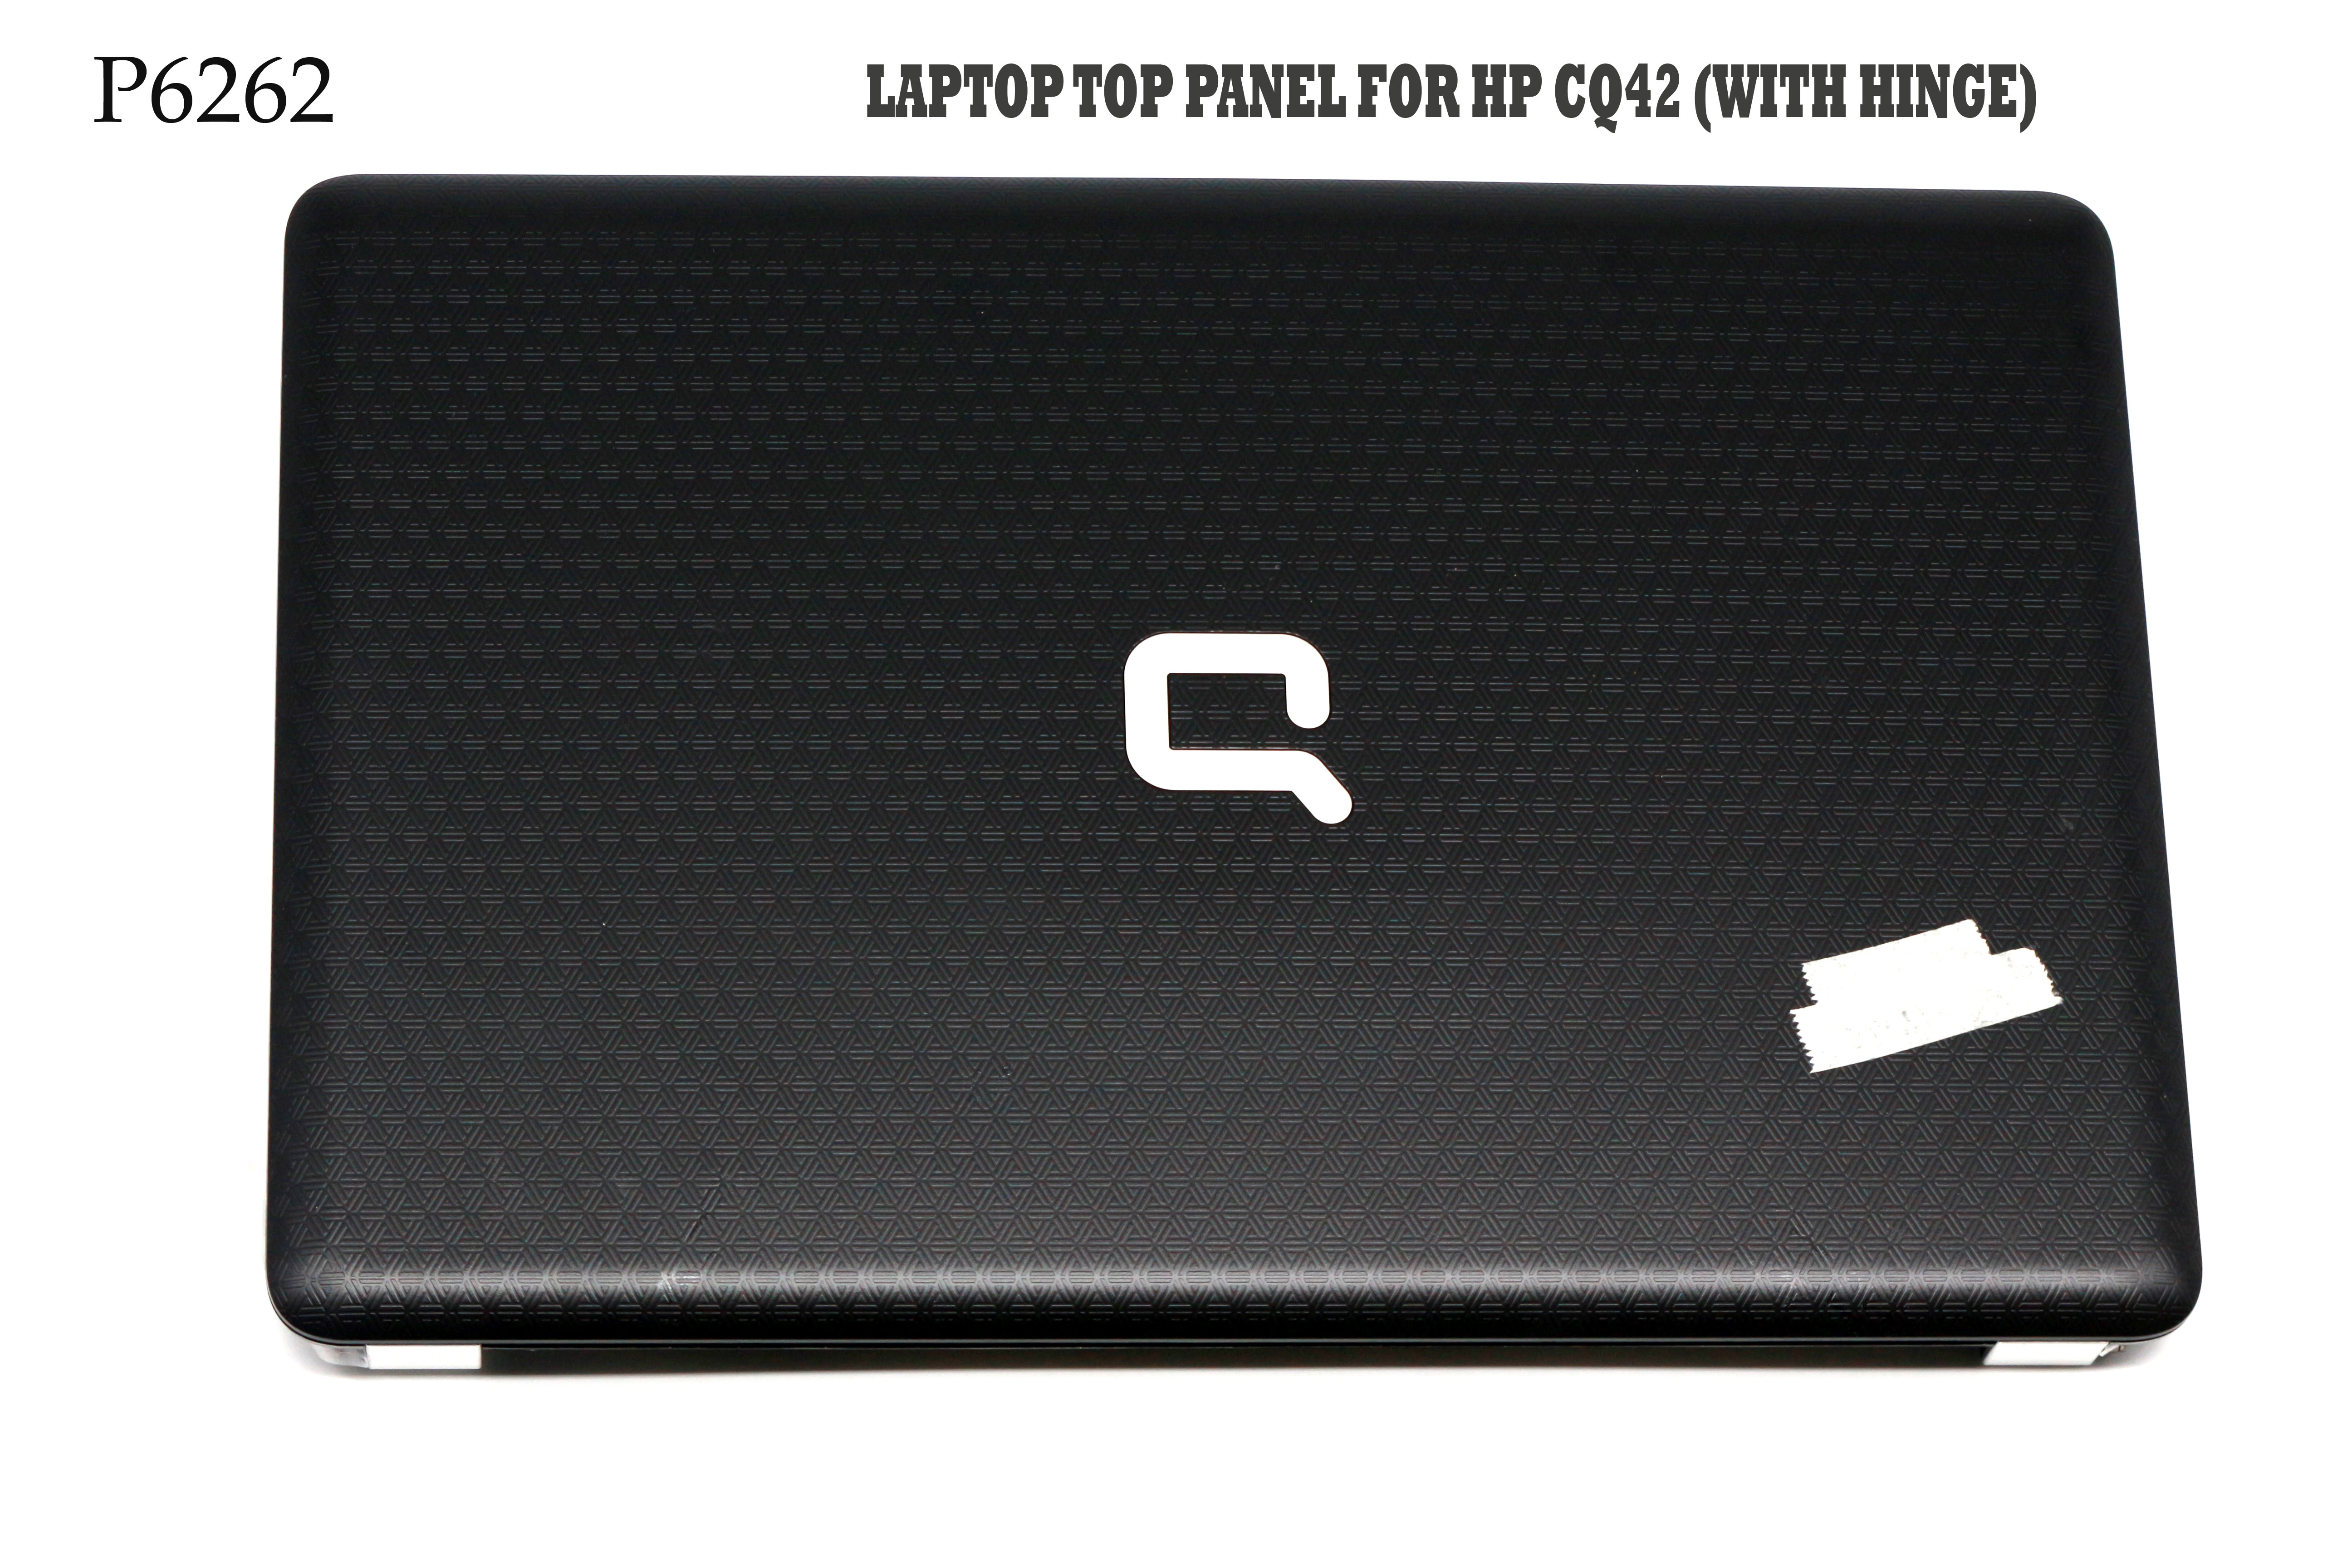 LAPTOP TOP PANEL FOR HP CQ42 (WITH HINGE)